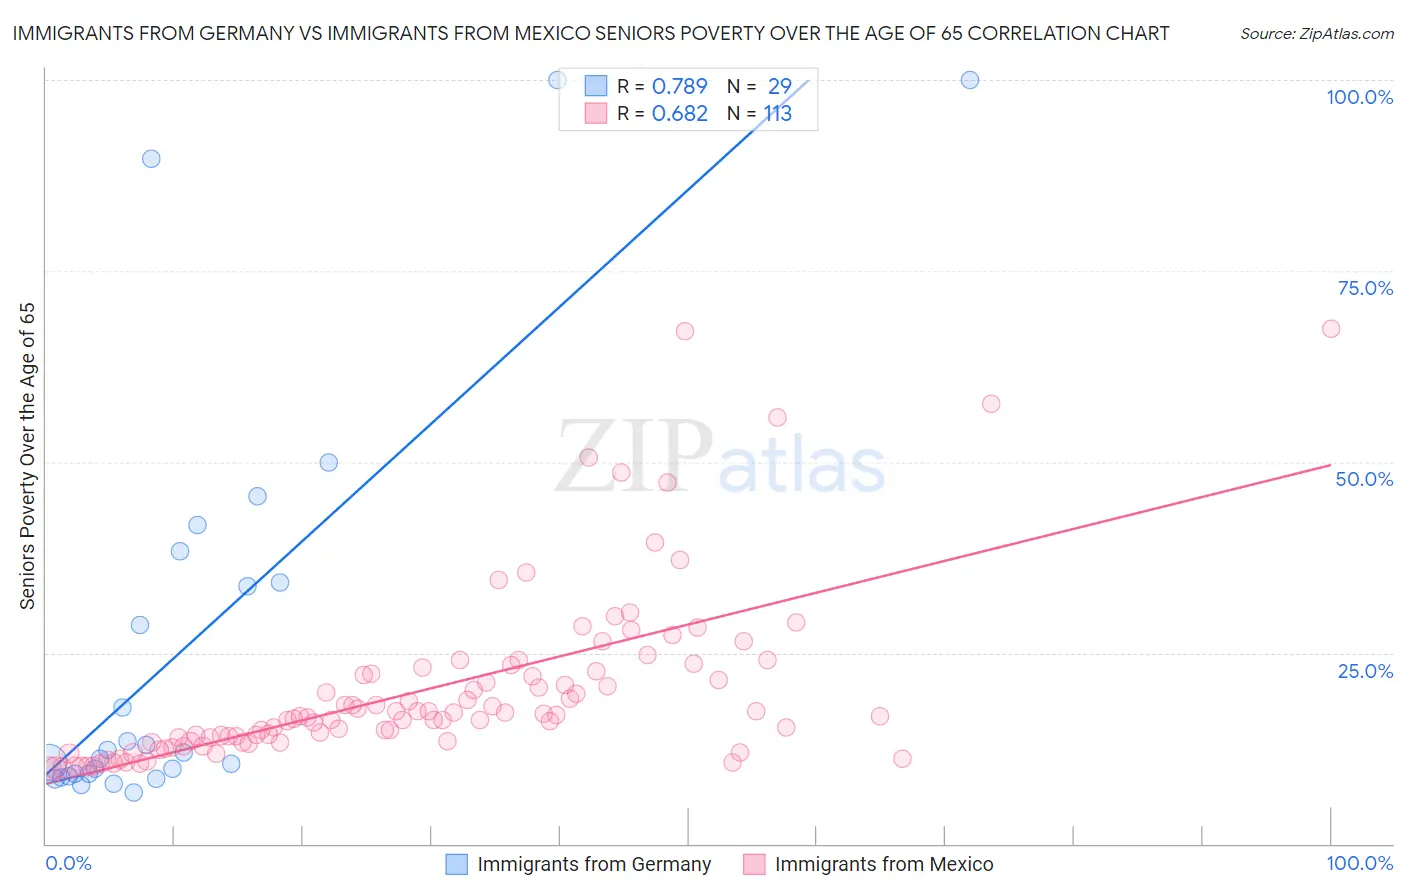 Immigrants from Germany vs Immigrants from Mexico Seniors Poverty Over the Age of 65